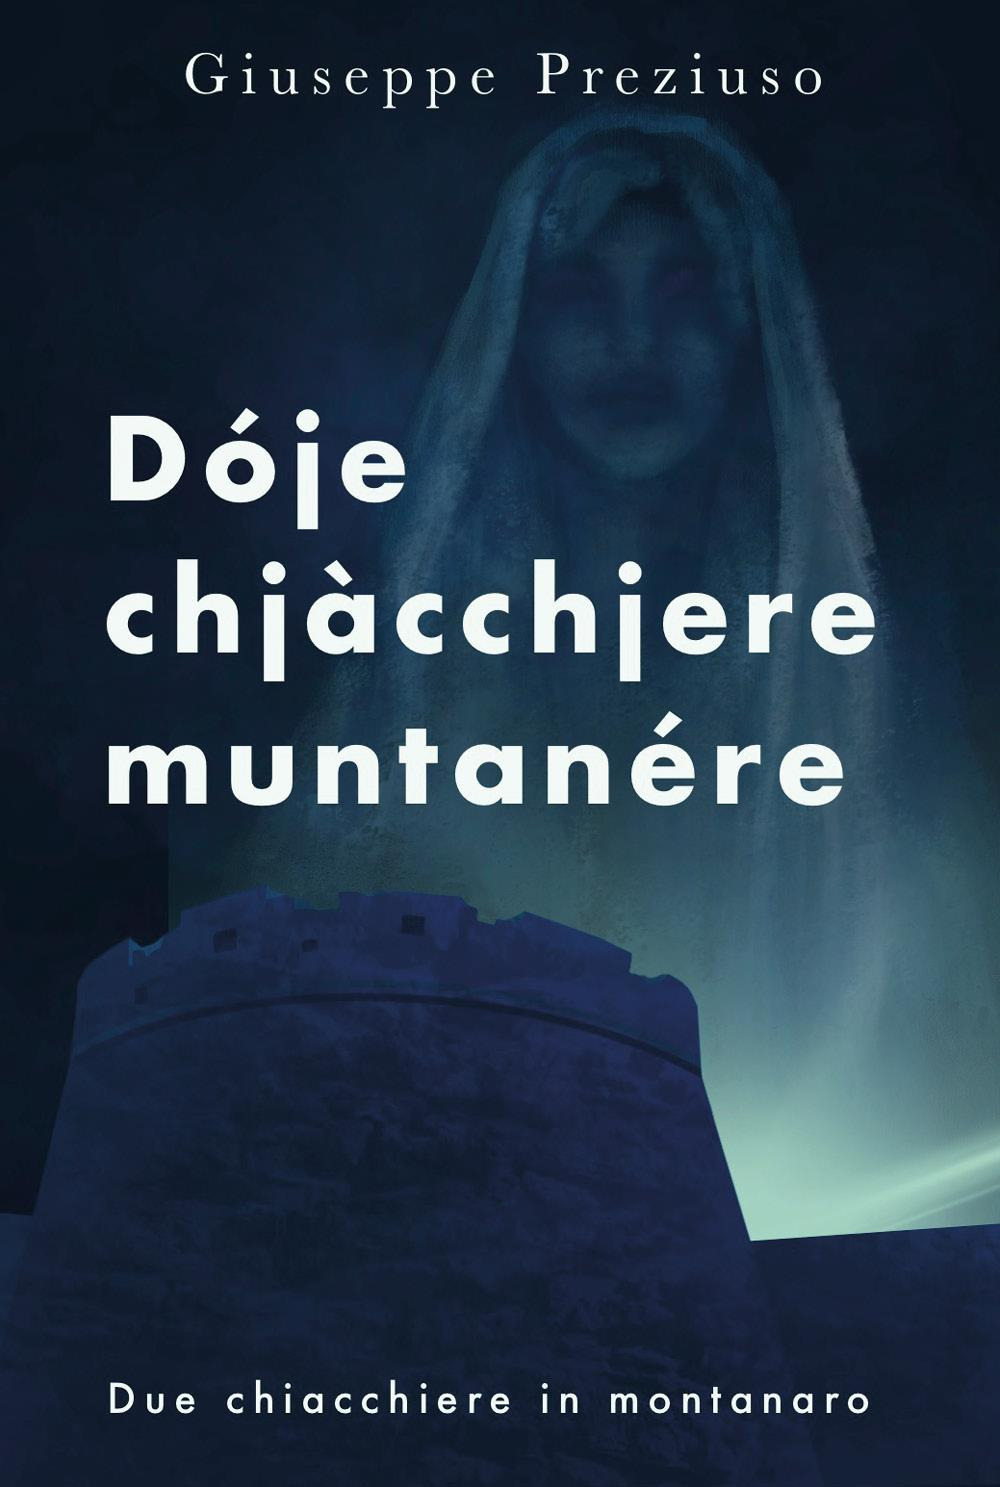 Dóje chjàcchjere muntanére. Due chiacchiere in montanaro